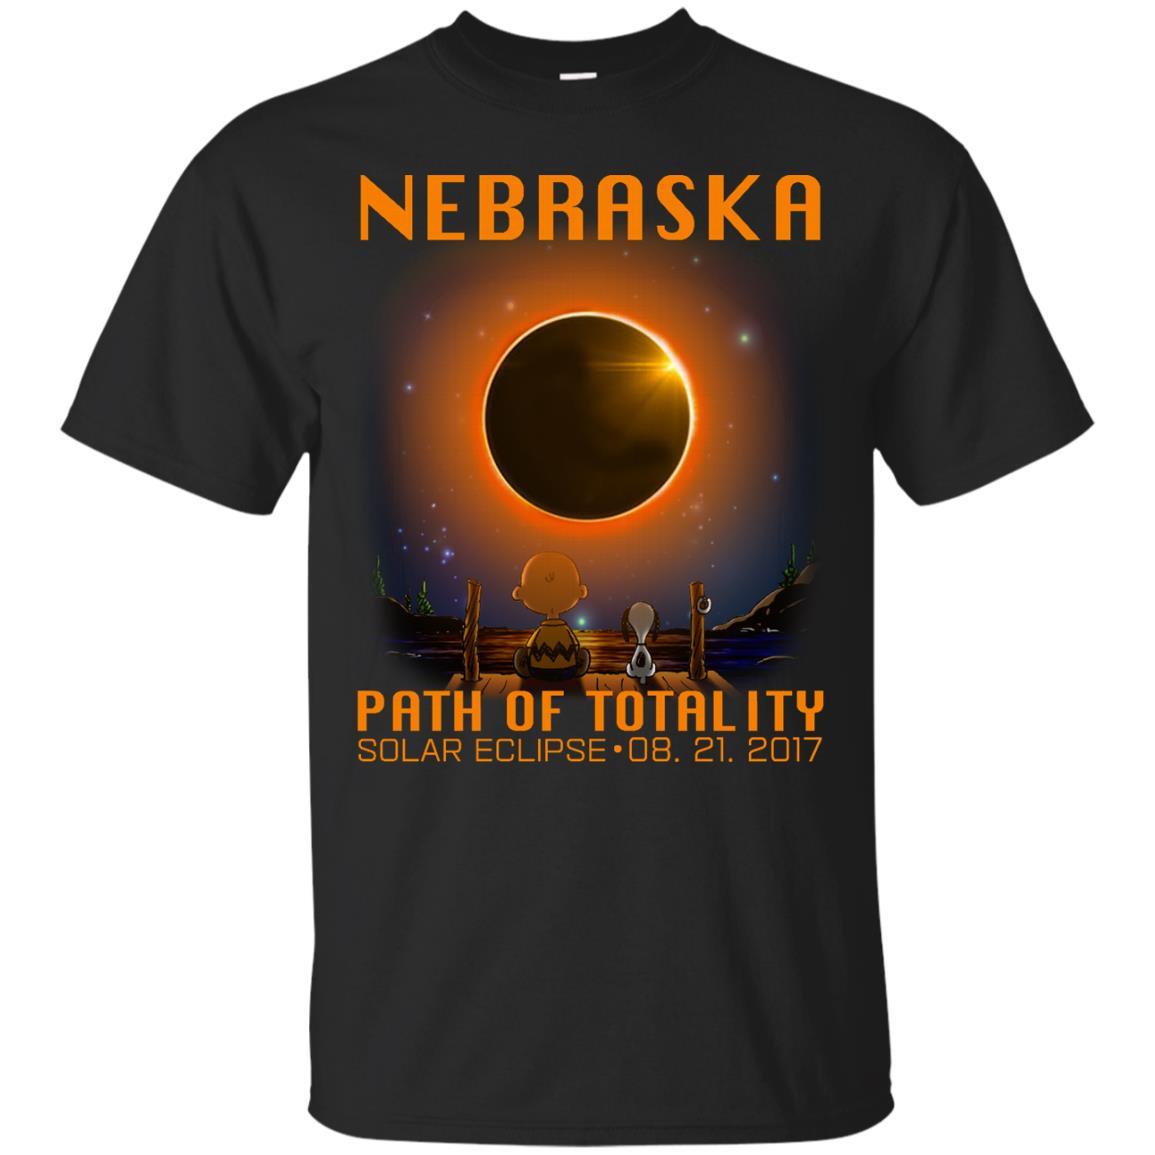 Shop Snoopy And Charlie Brown - Nebraska - Path Of Totality Solar Eclipse S Shirts